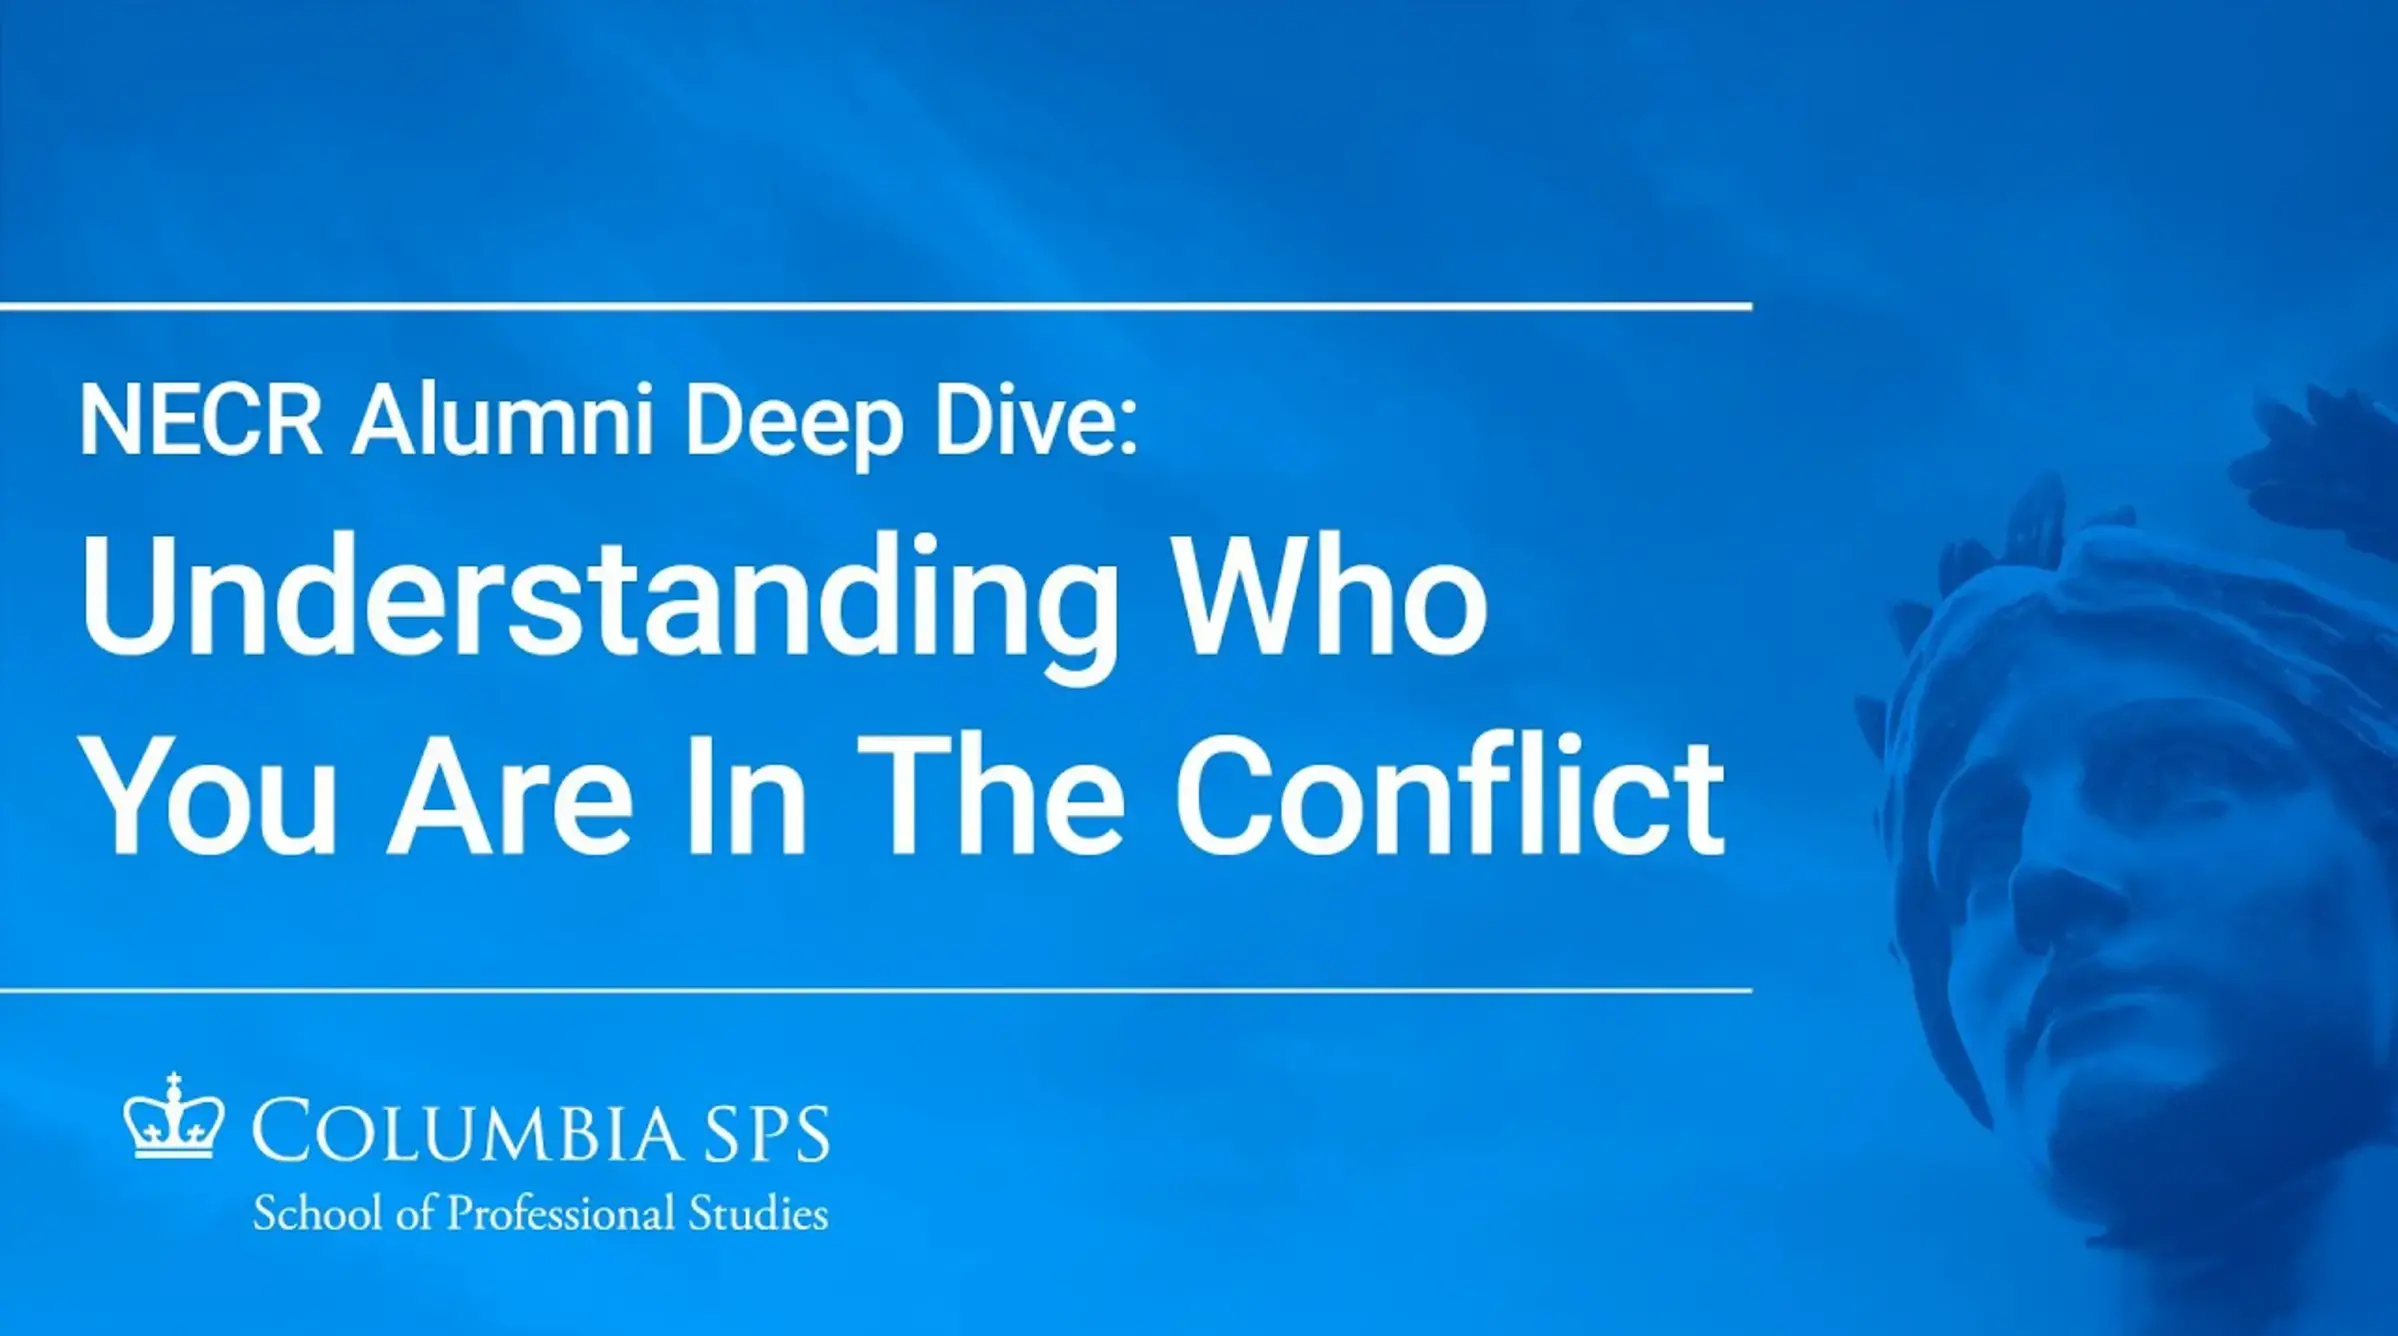 NECR Alumni Deep Dive: Understanding Who You Are In The Conflict